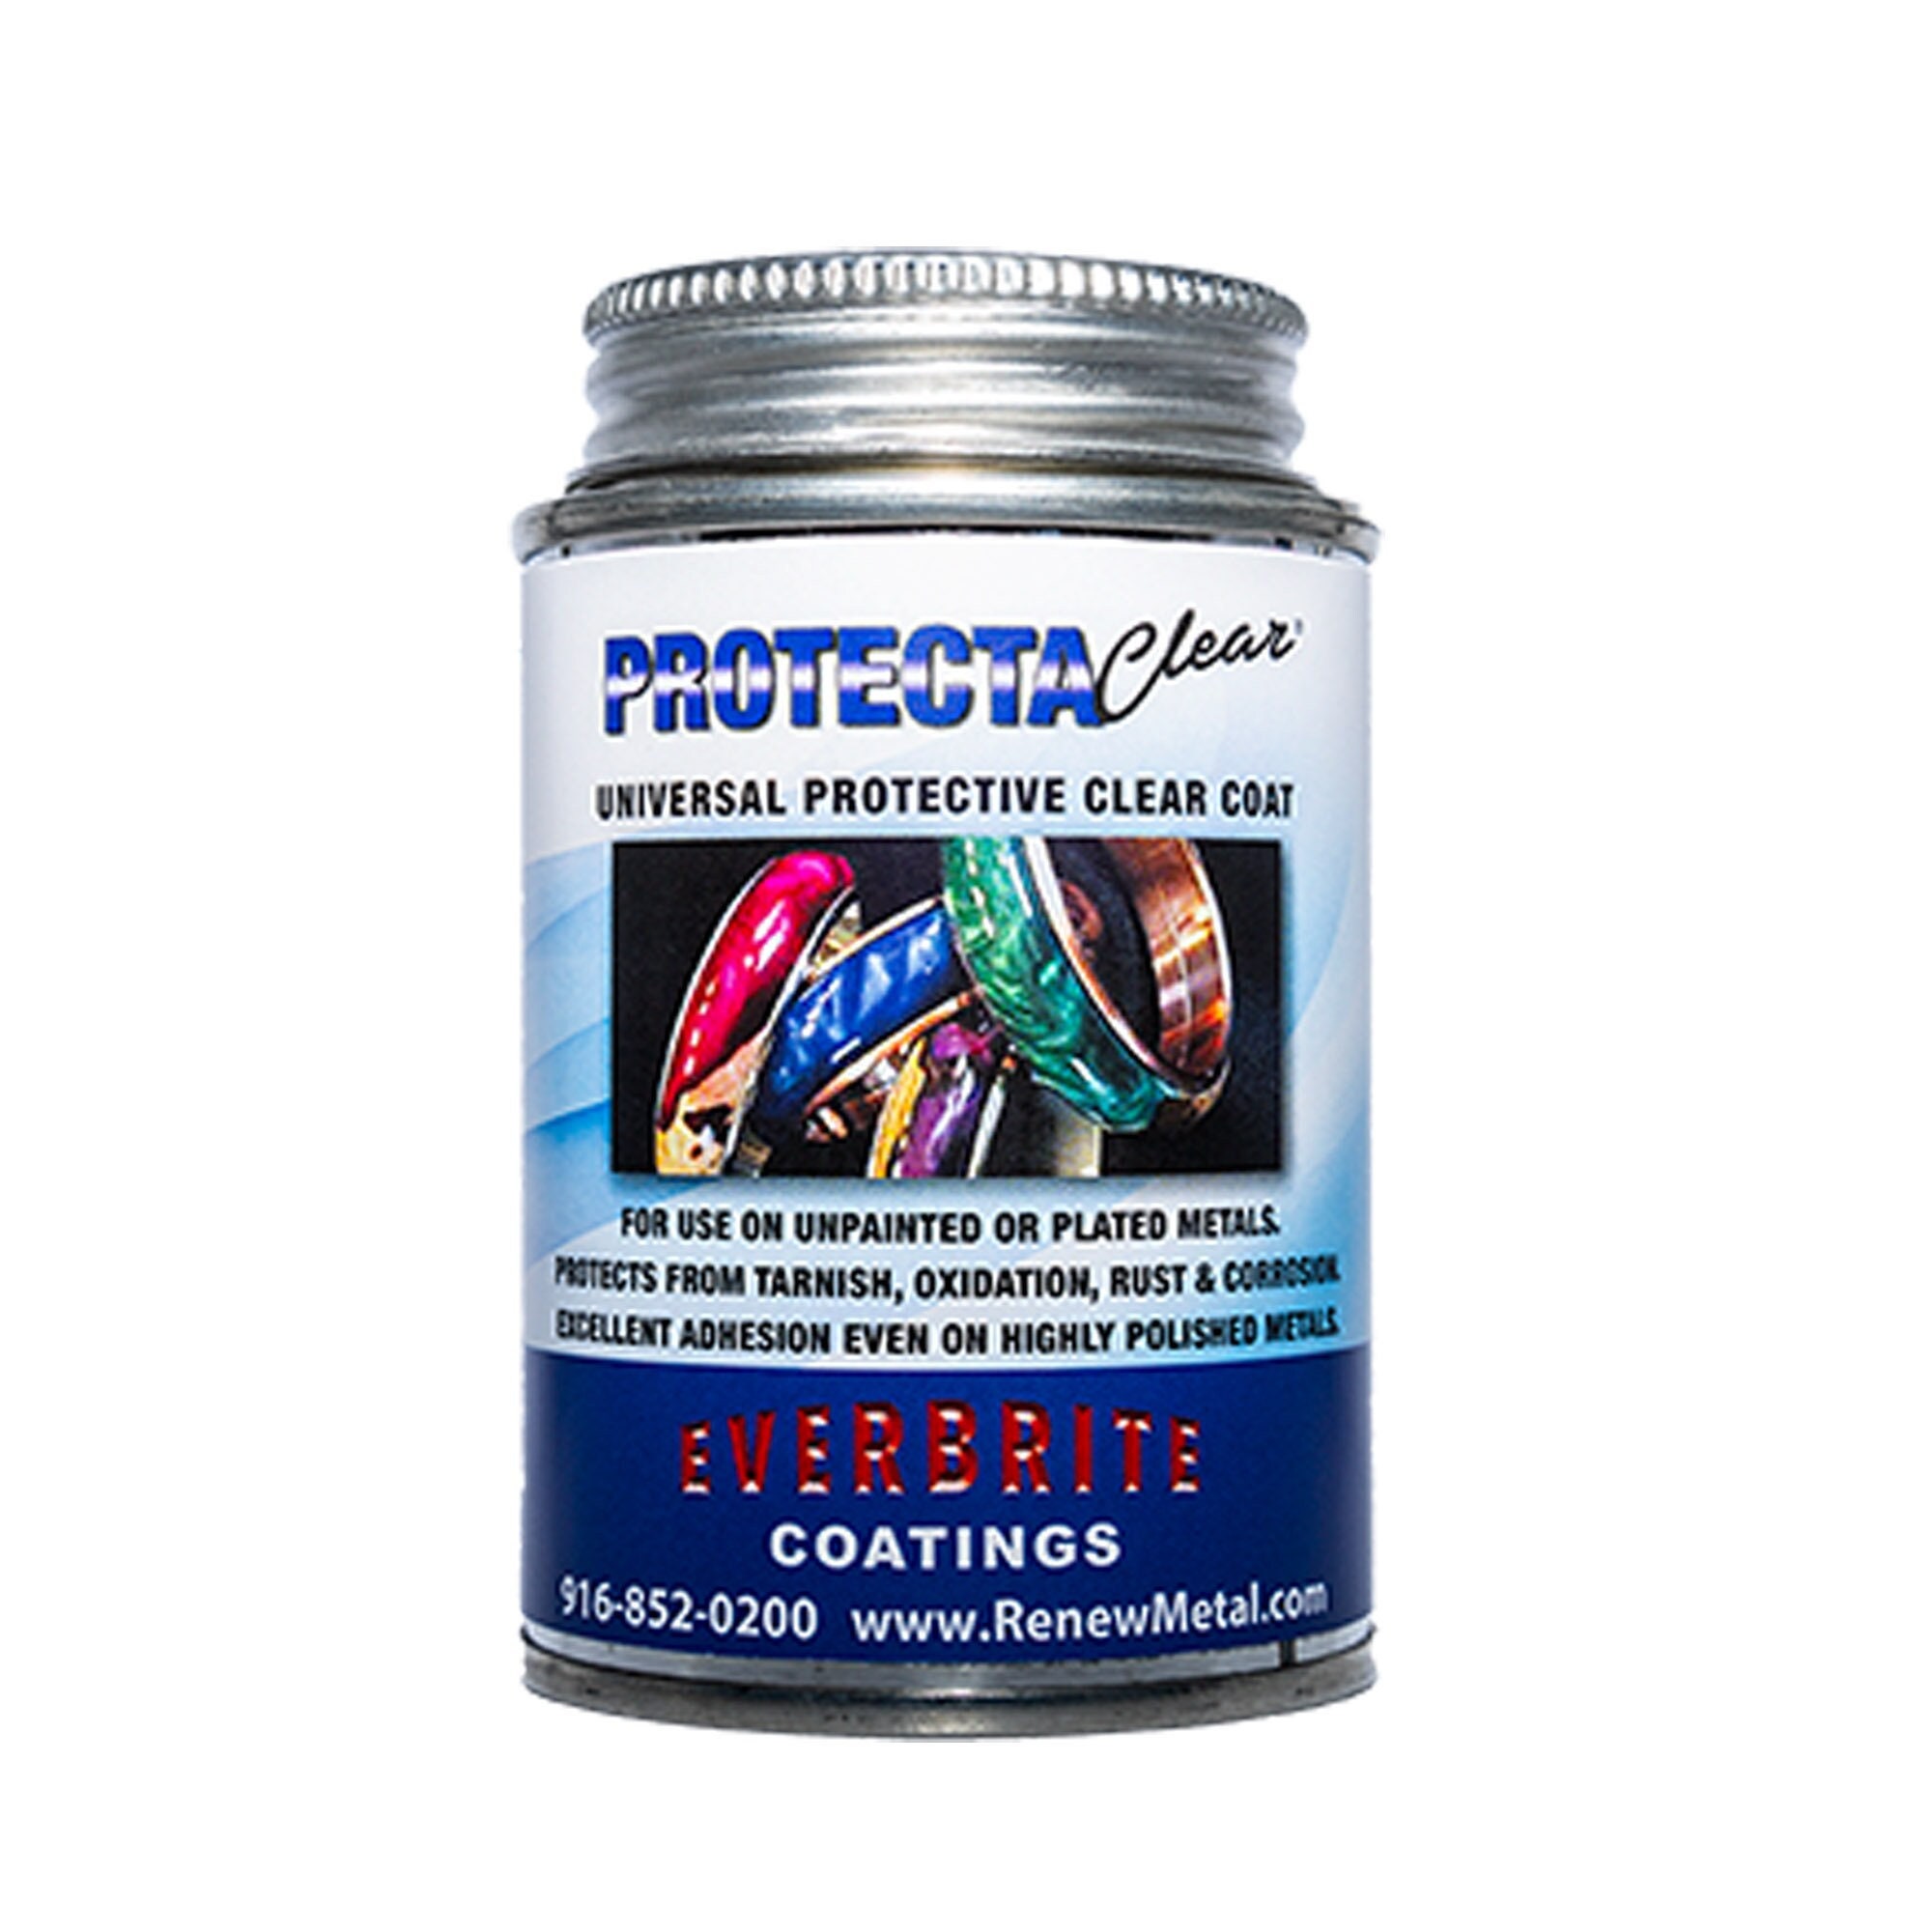 Everbrite Pint Kit with Copper Cleaning Gel and Metal Polish 